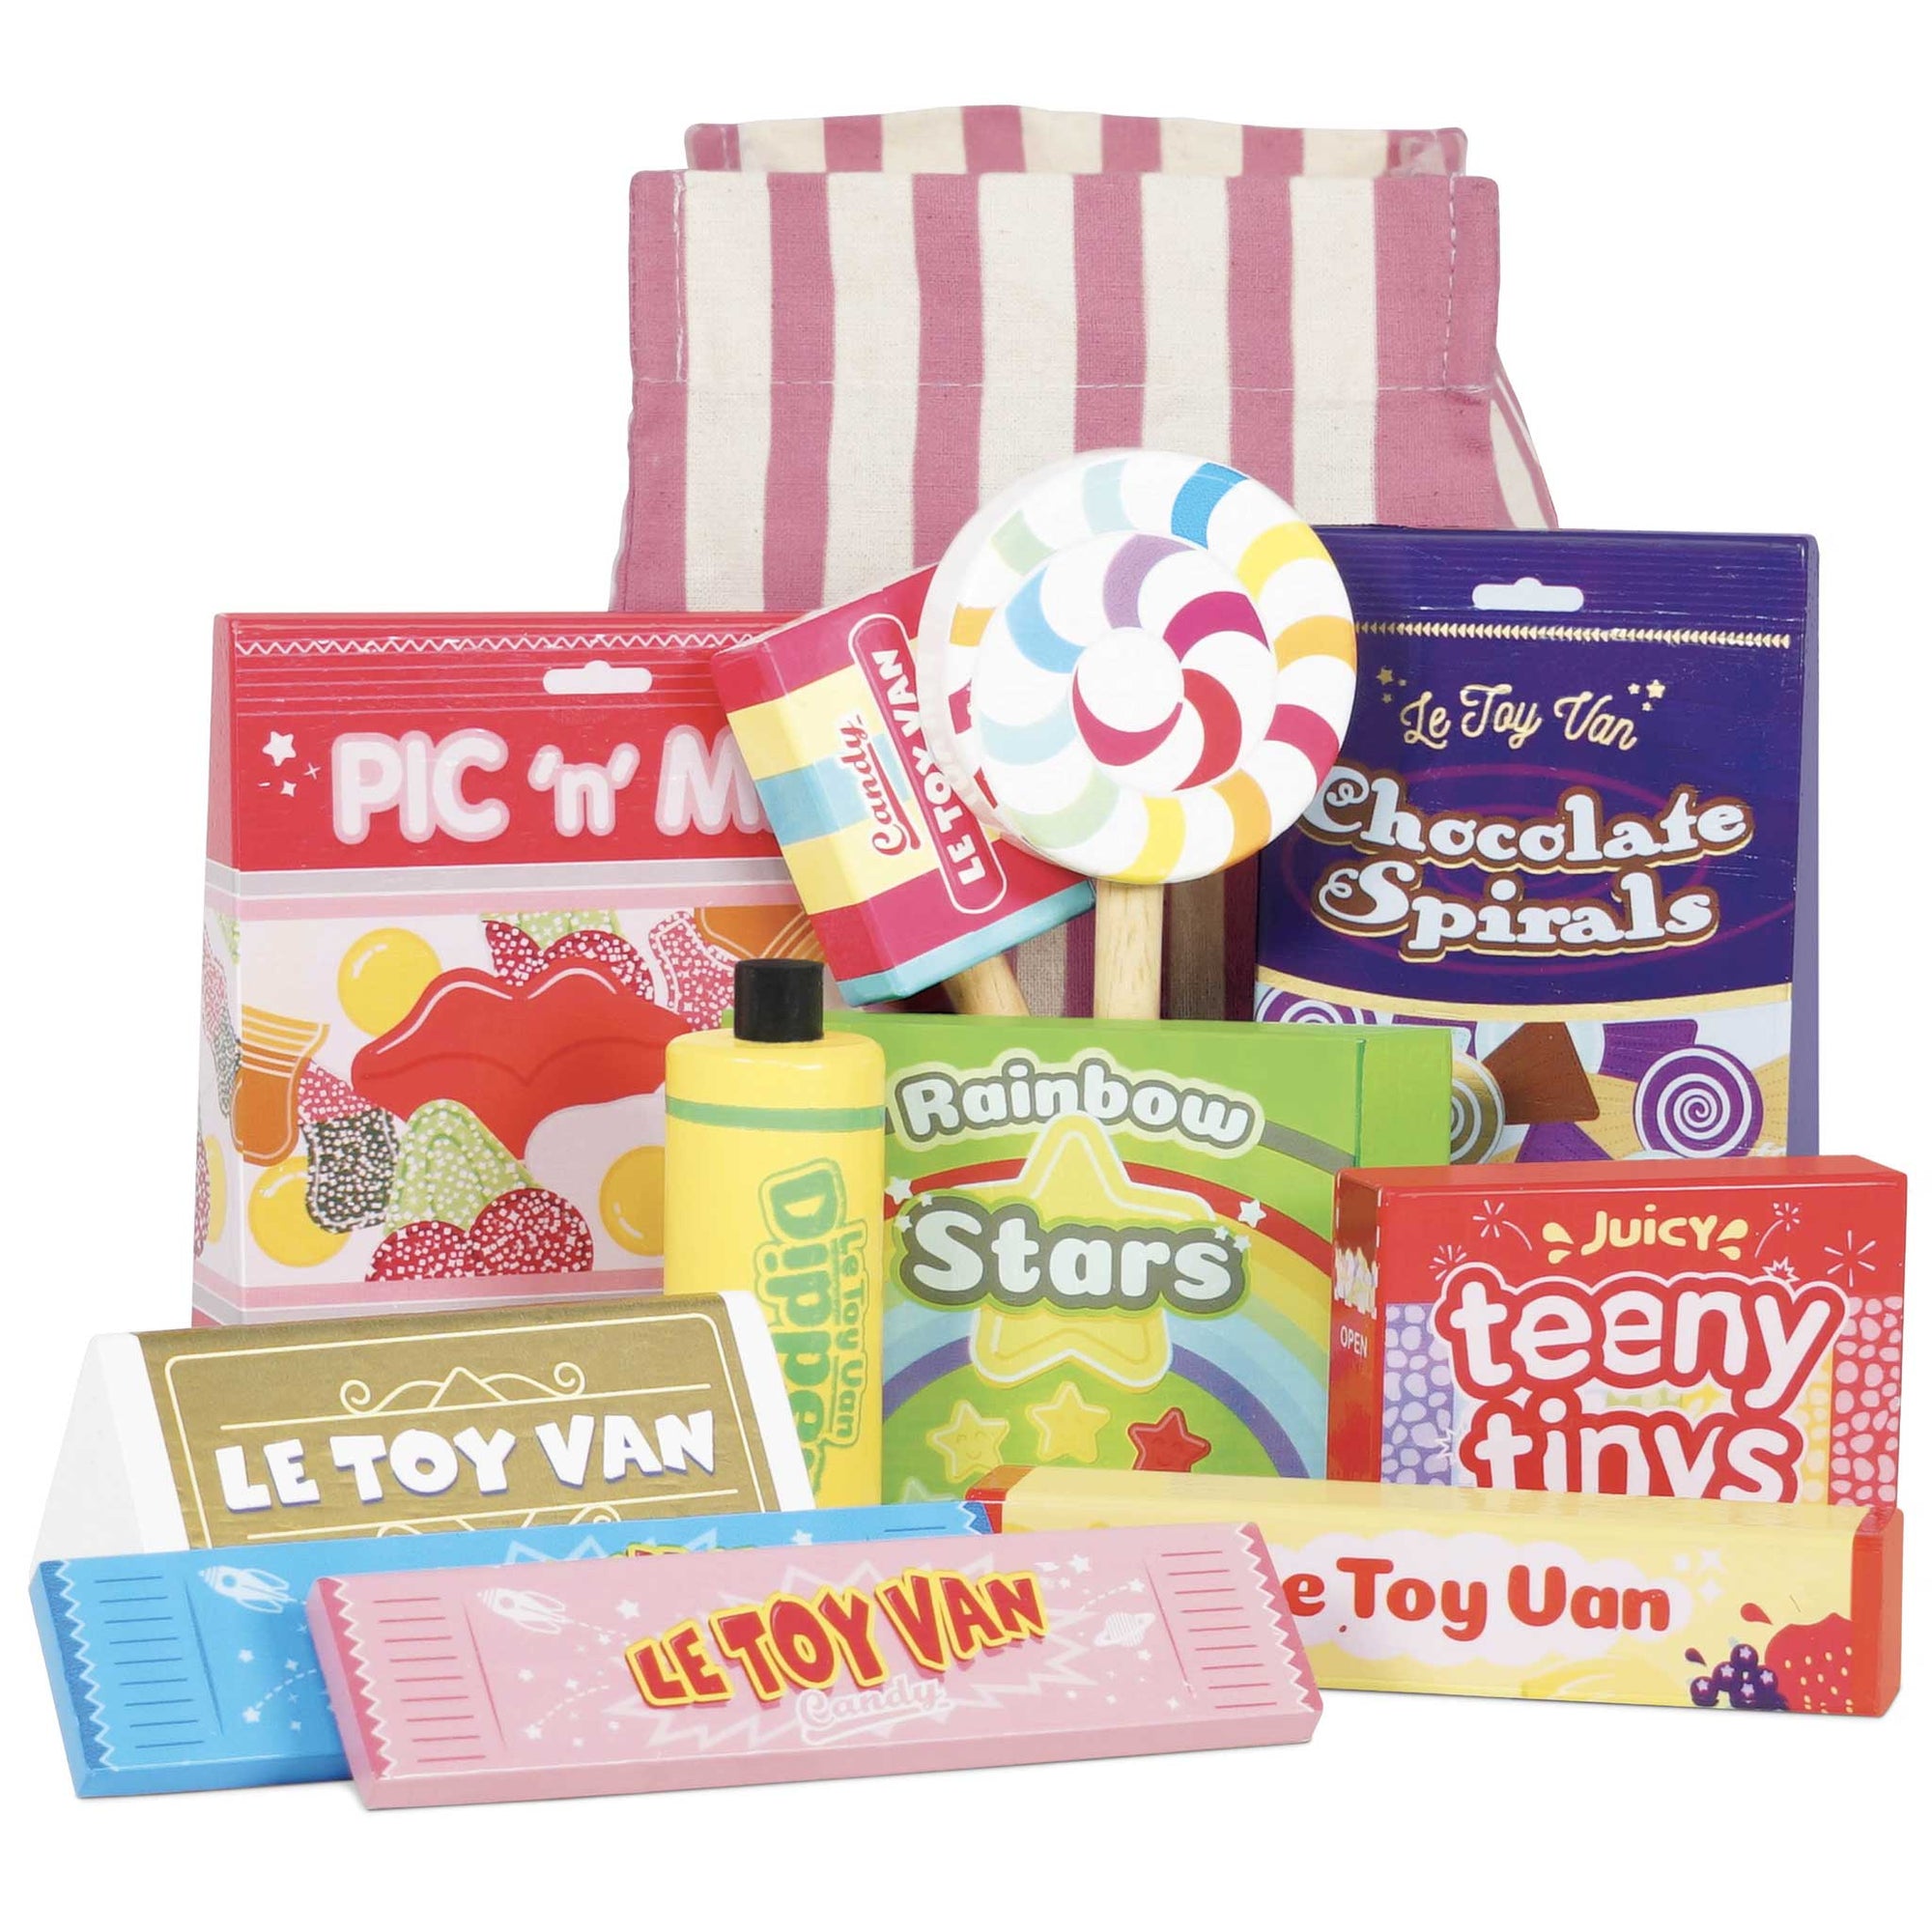 Le Toy Van Retro Sweets and Candy Roleplay Set